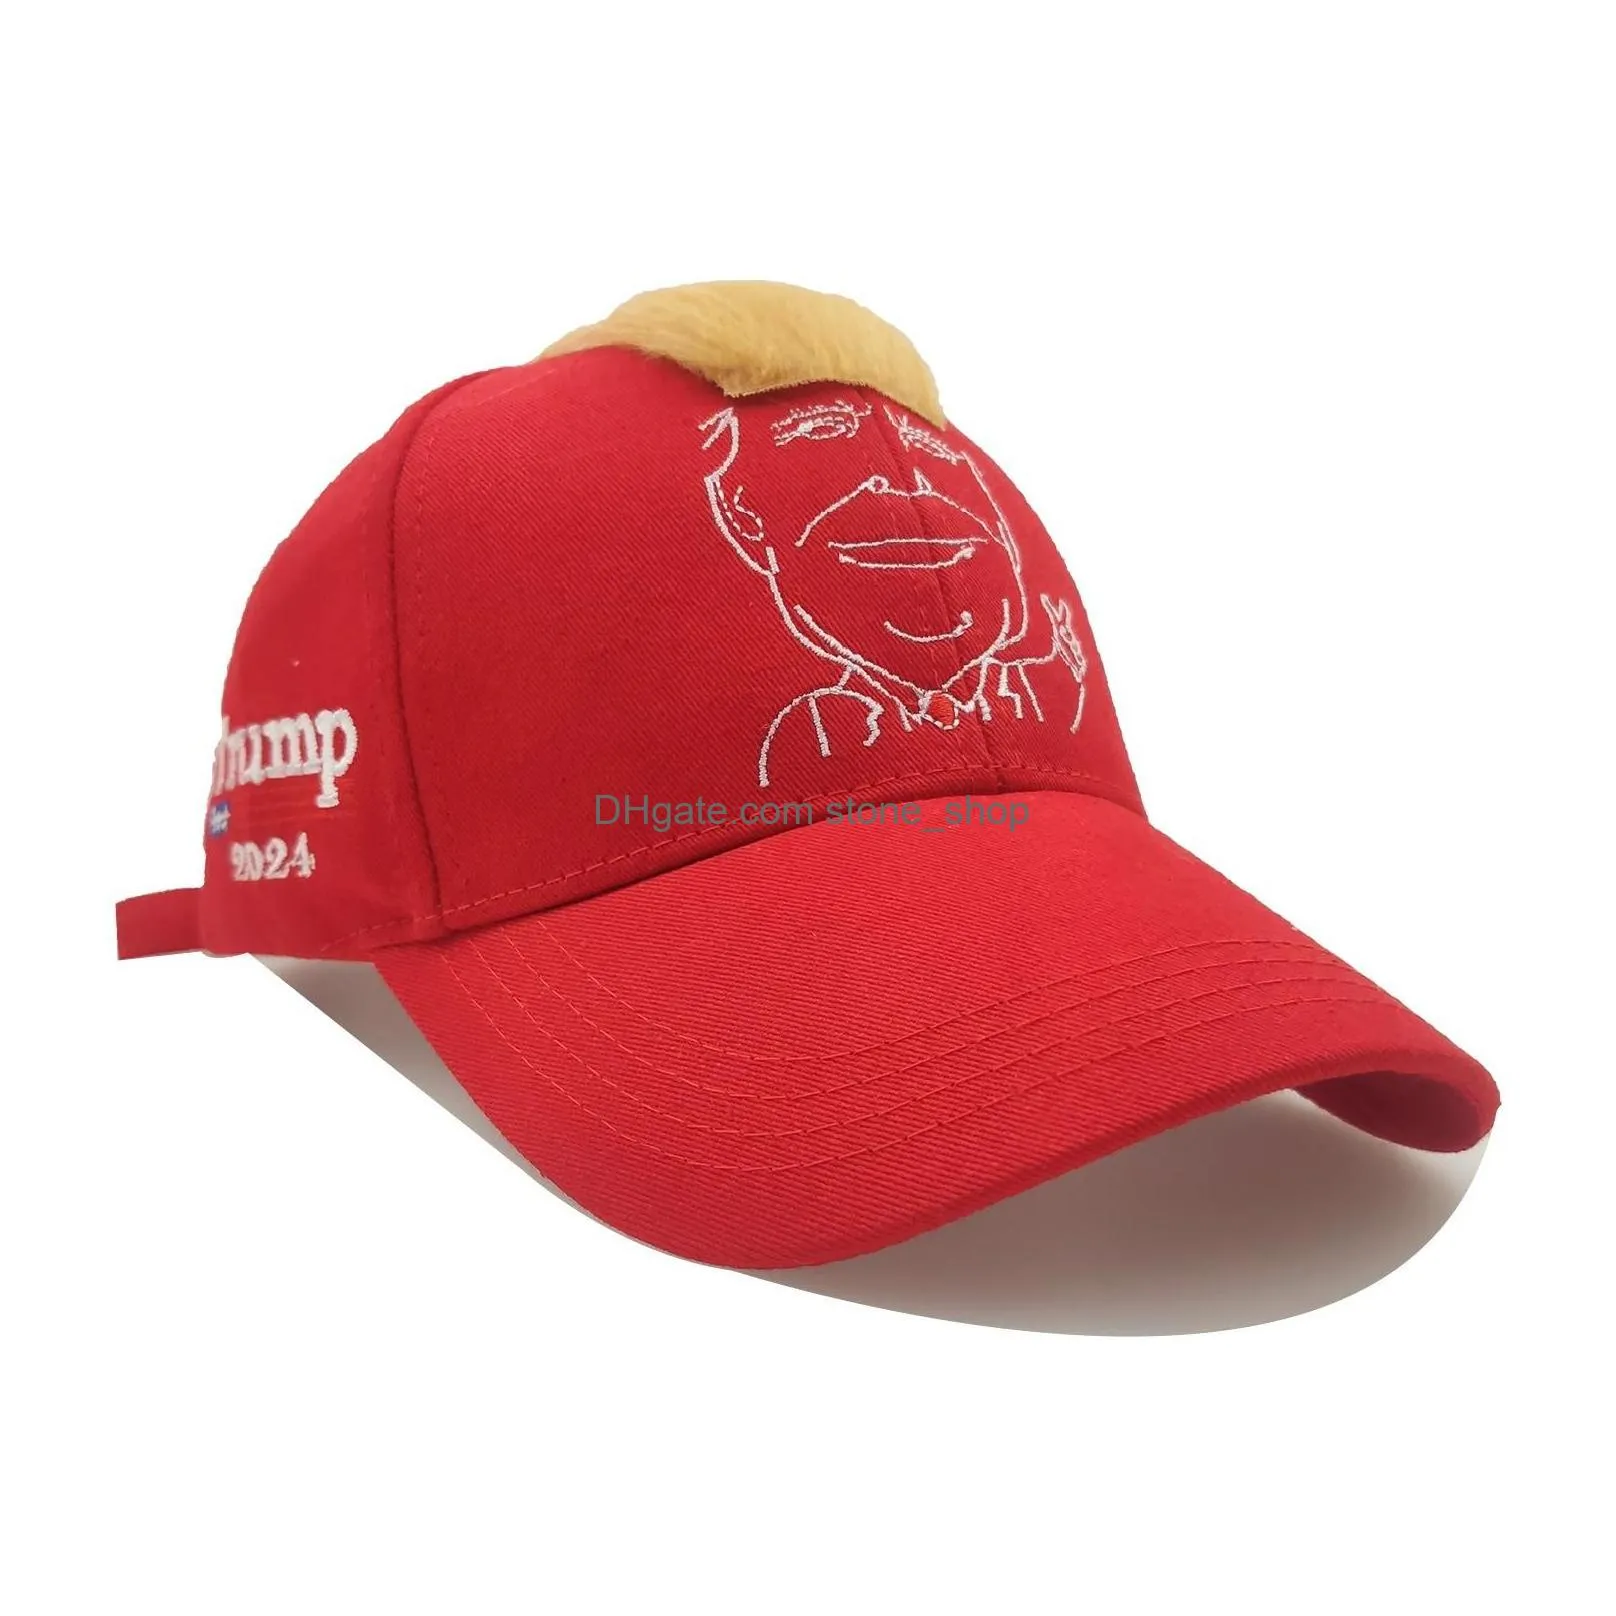 trump 2024 embroidery hat with hair baseball cap trump supporter rally parade cotton hats